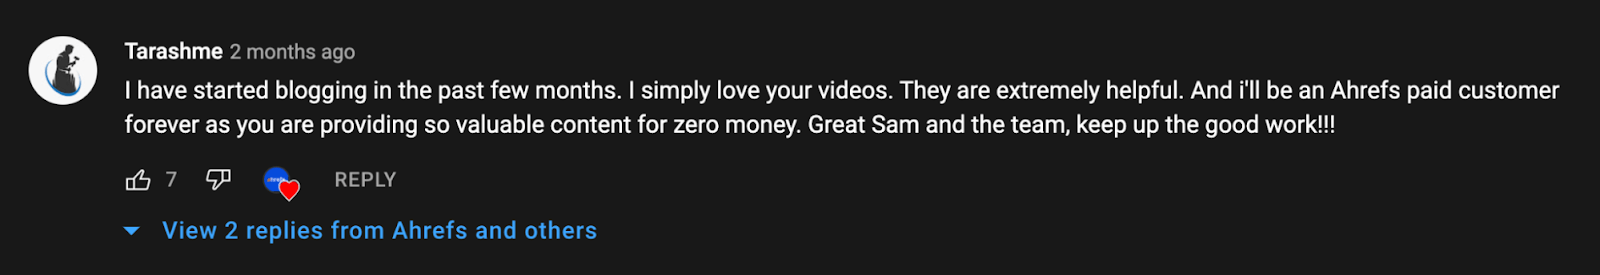 17-youtube-comment.png